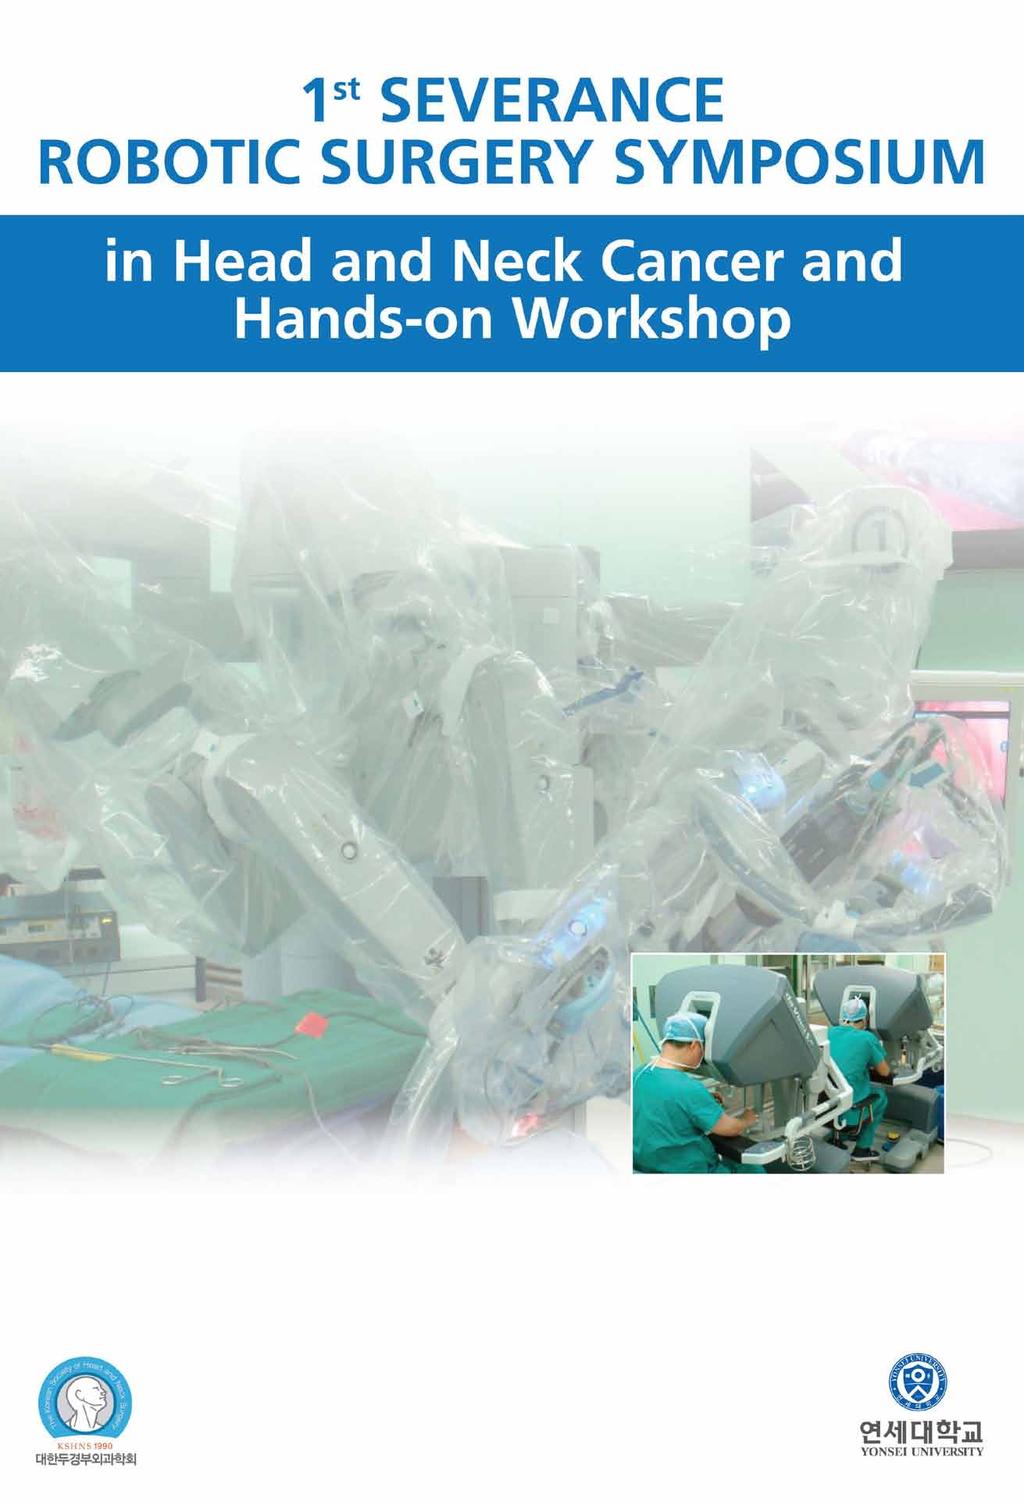 / President of Korean Society of Head and neck Surgery Session I Robotic Surgery: Technical Advance in Robotic Surgical System Moderator: Kwang Hyun Kim, M.D.